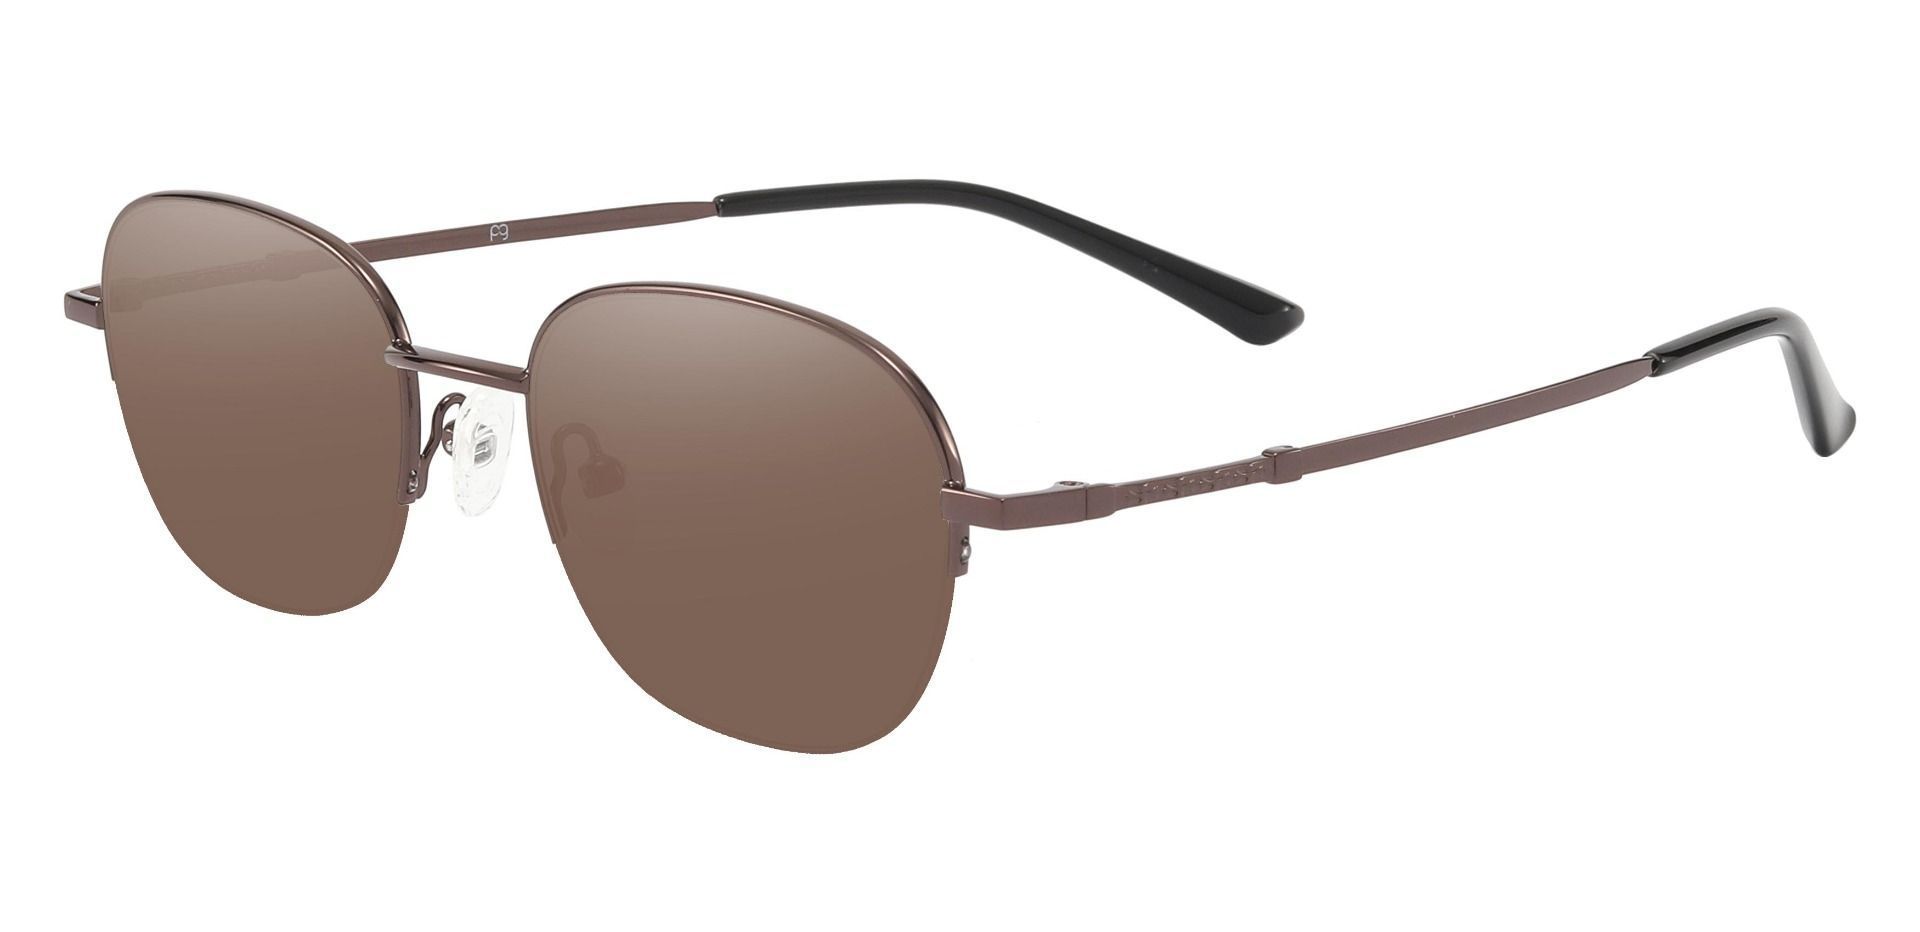 Rochester Oval Lined Bifocal Sunglasses - Brown Frame With Brown Lenses